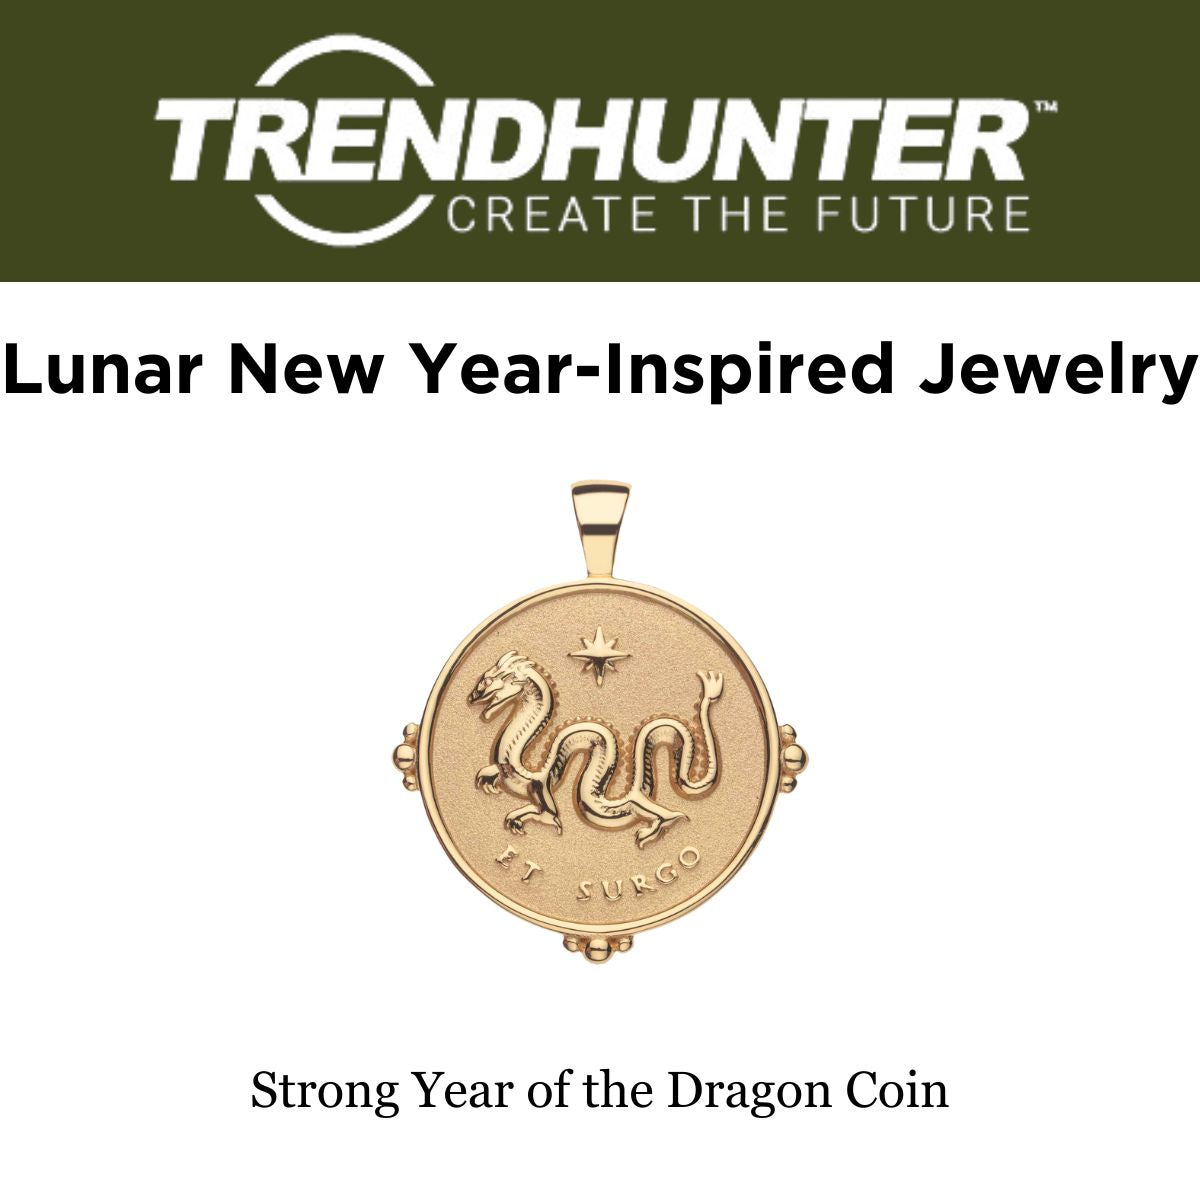 Press Highlight: Trend Hunter's 'Lunar New Year-Inspired Jewelry'